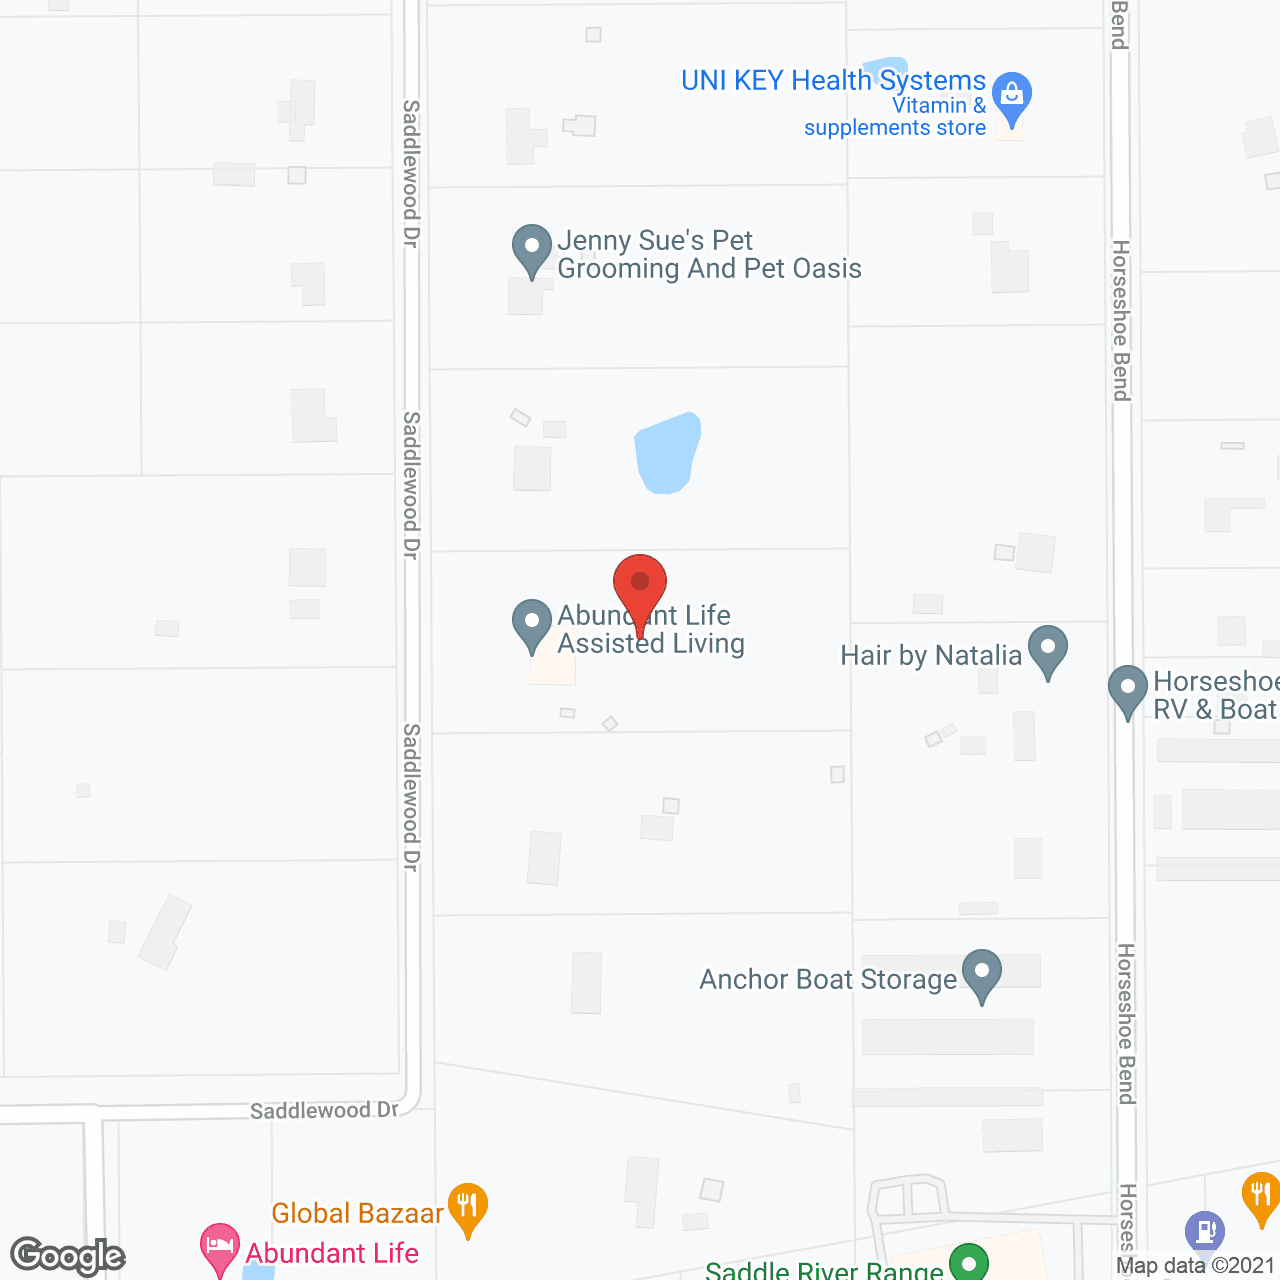 Abundant Life Assisted Living in google map